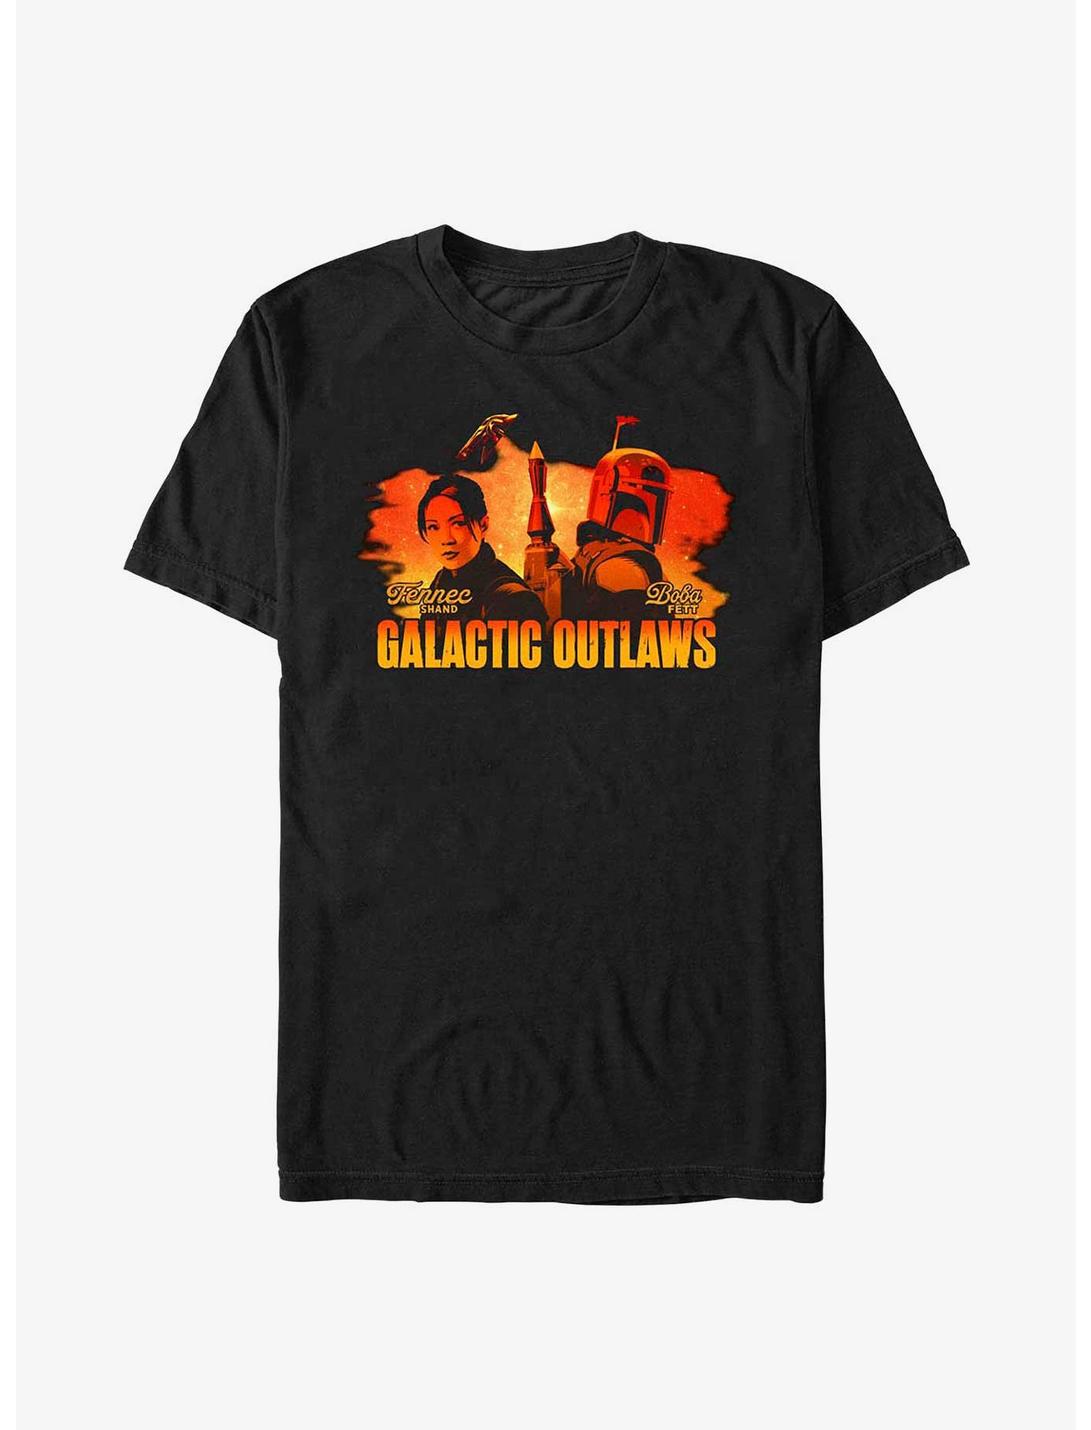 Star Wars: The Book Of Boba Fett Galactic Outlaws Sunset T-Shirt, BLACK, hi-res